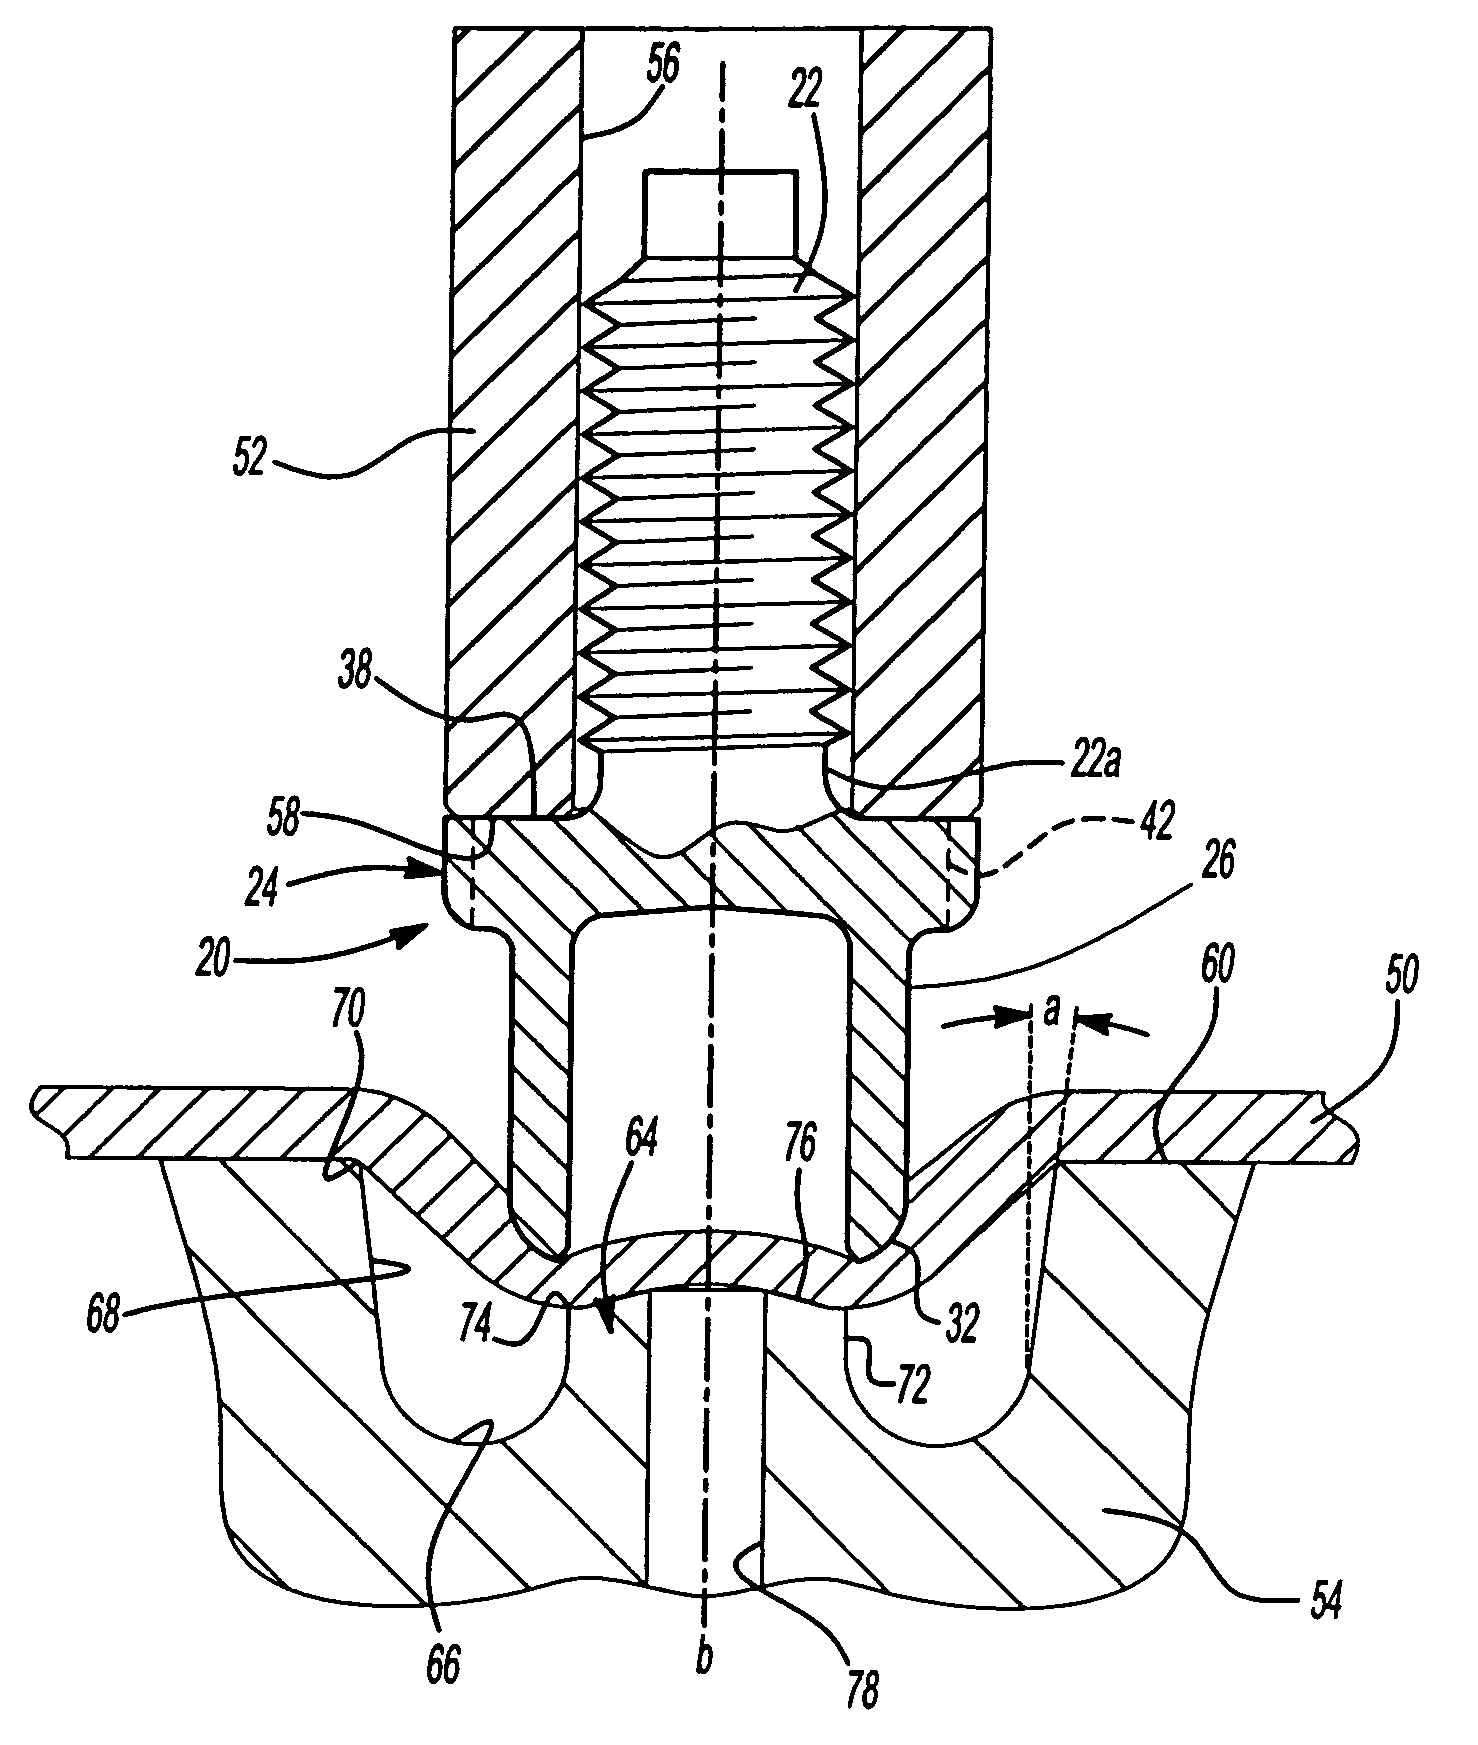 Method of attaching a self-piercing element in a panel and die member